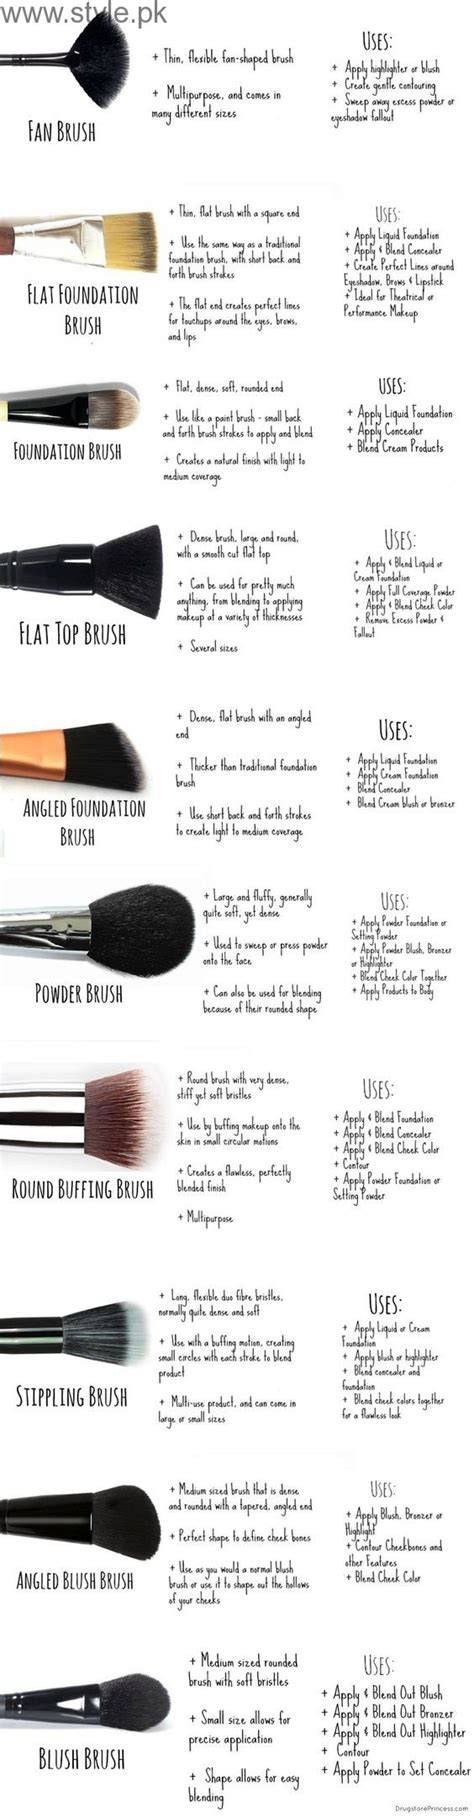 basic makeup brushes guide for beginners style pk